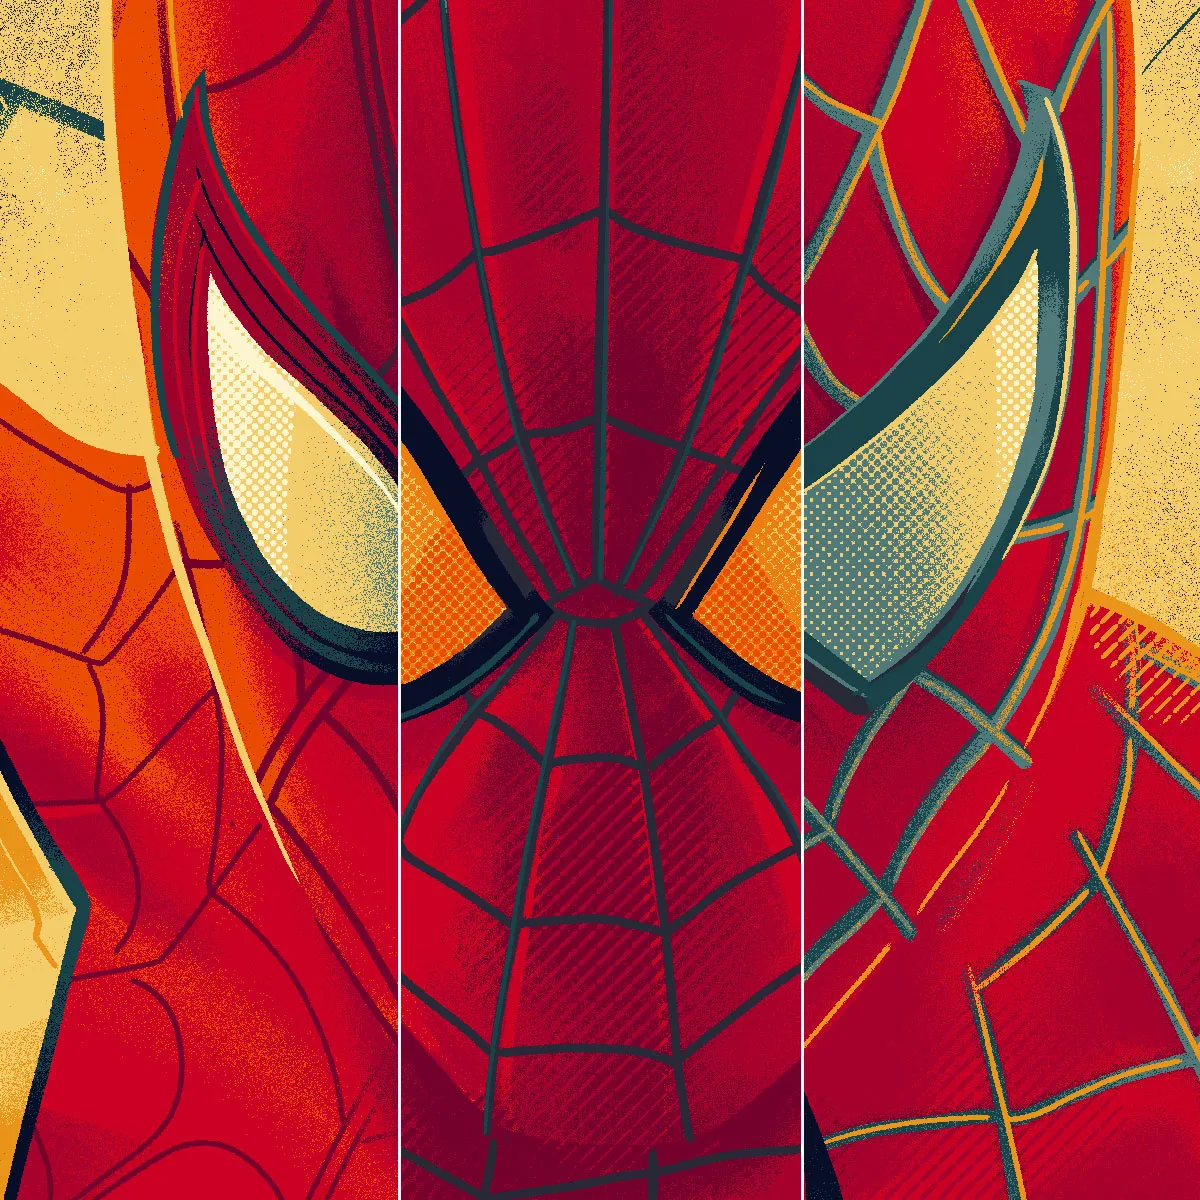 'Spider-Man: No Way Home' Exposure Art Poster, Extended Version Releases Today in Northern America | FMV6